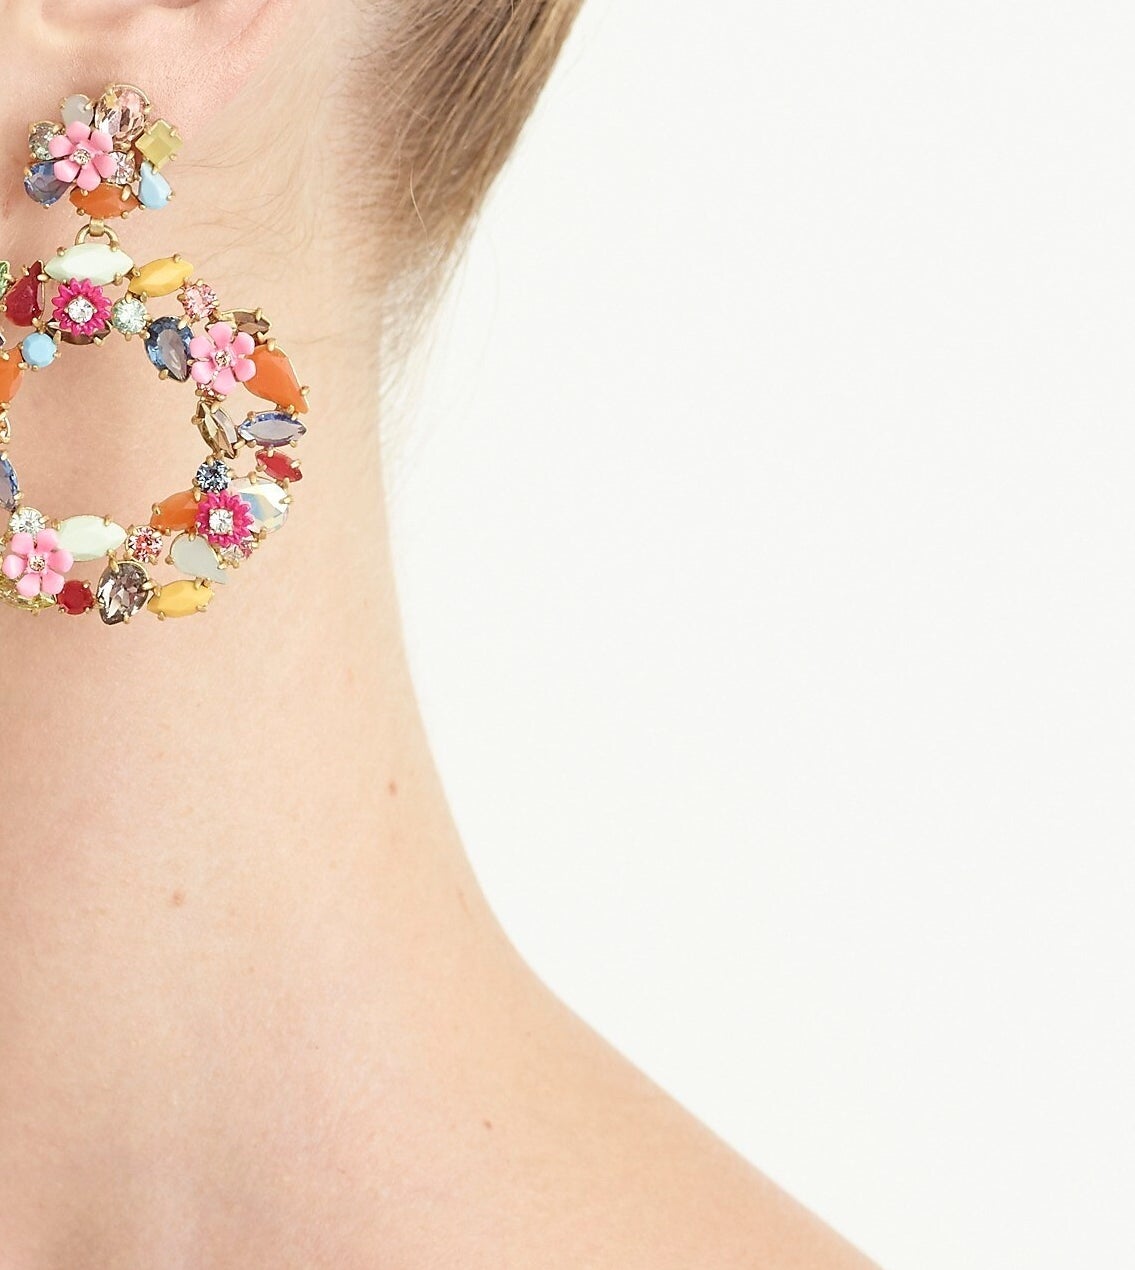 Model wearing the circular stud earrings with different colored stones and flowers